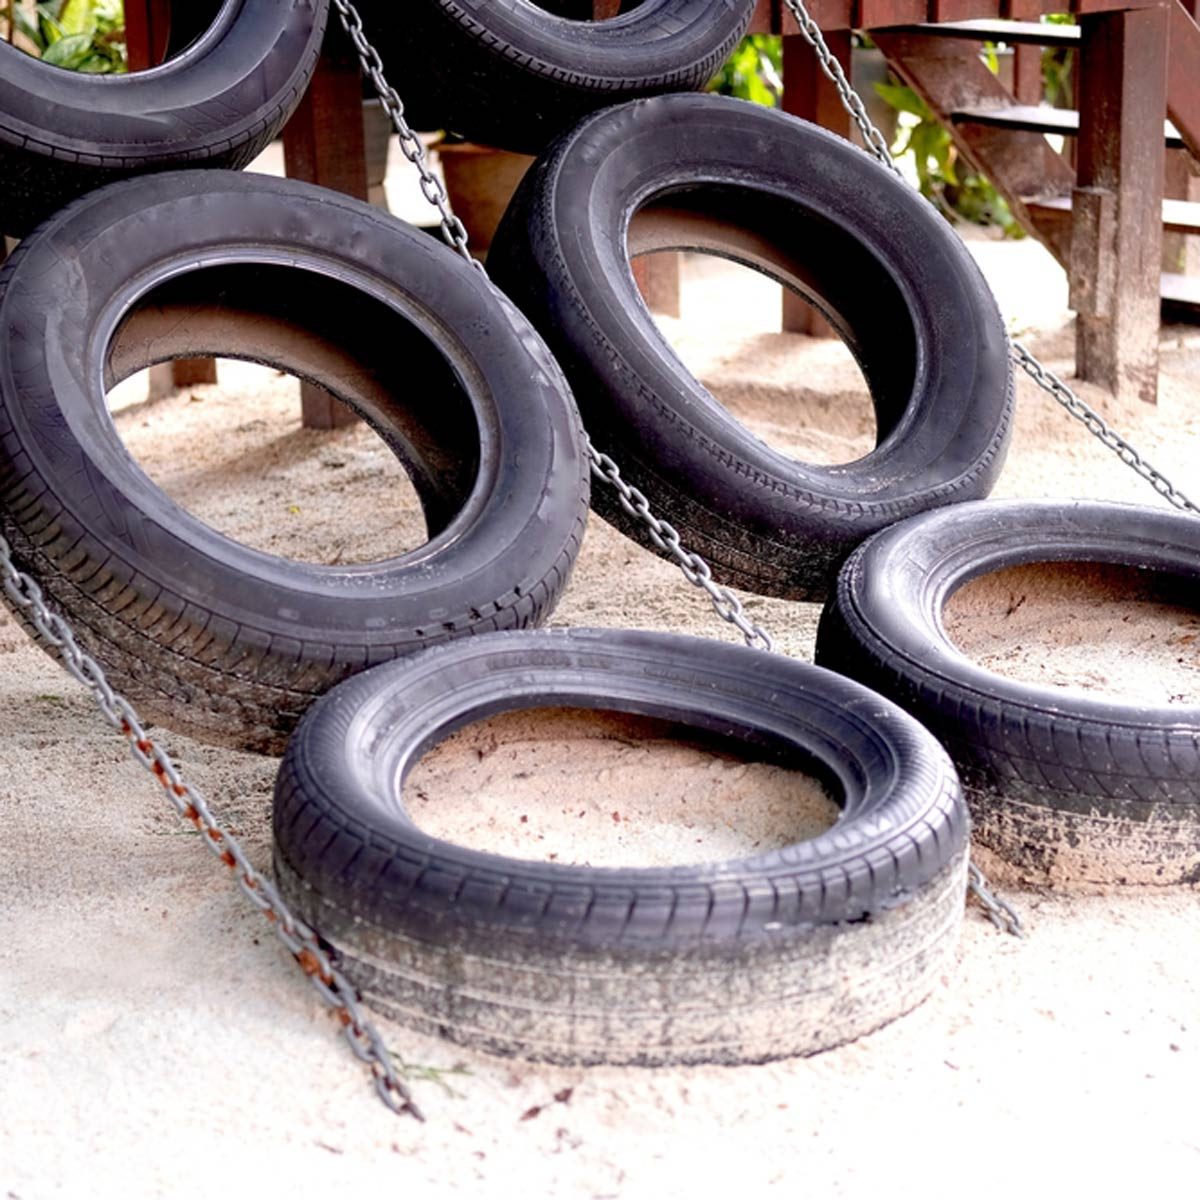 12 Things You Can Do With An Old Tire The Family Handyman